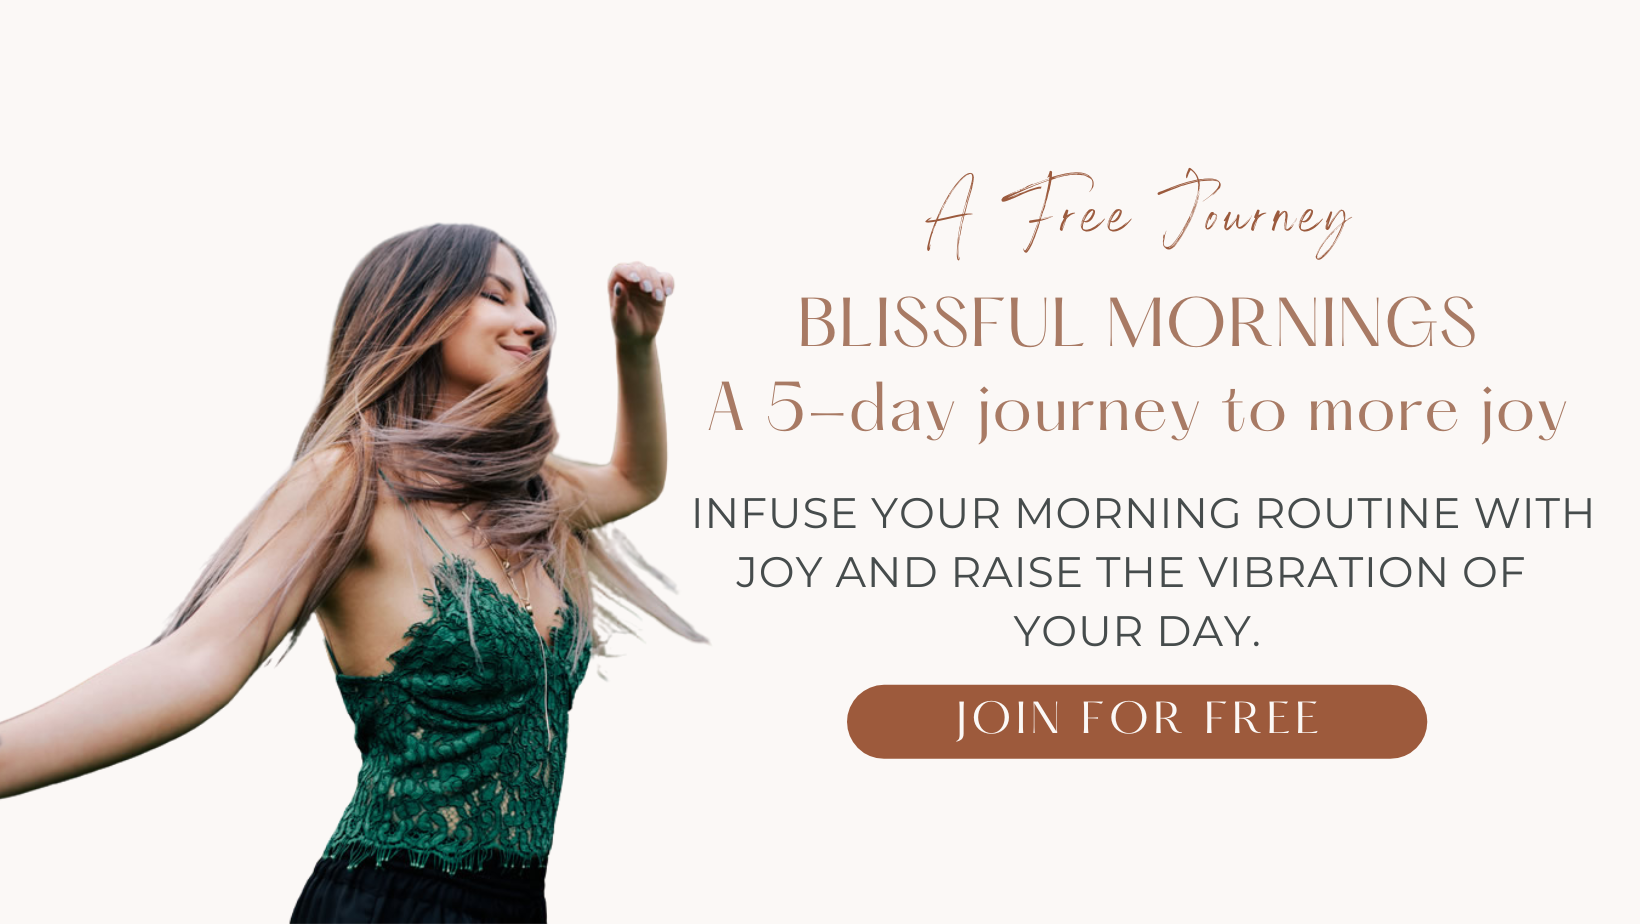 Join blissful Mornings for free